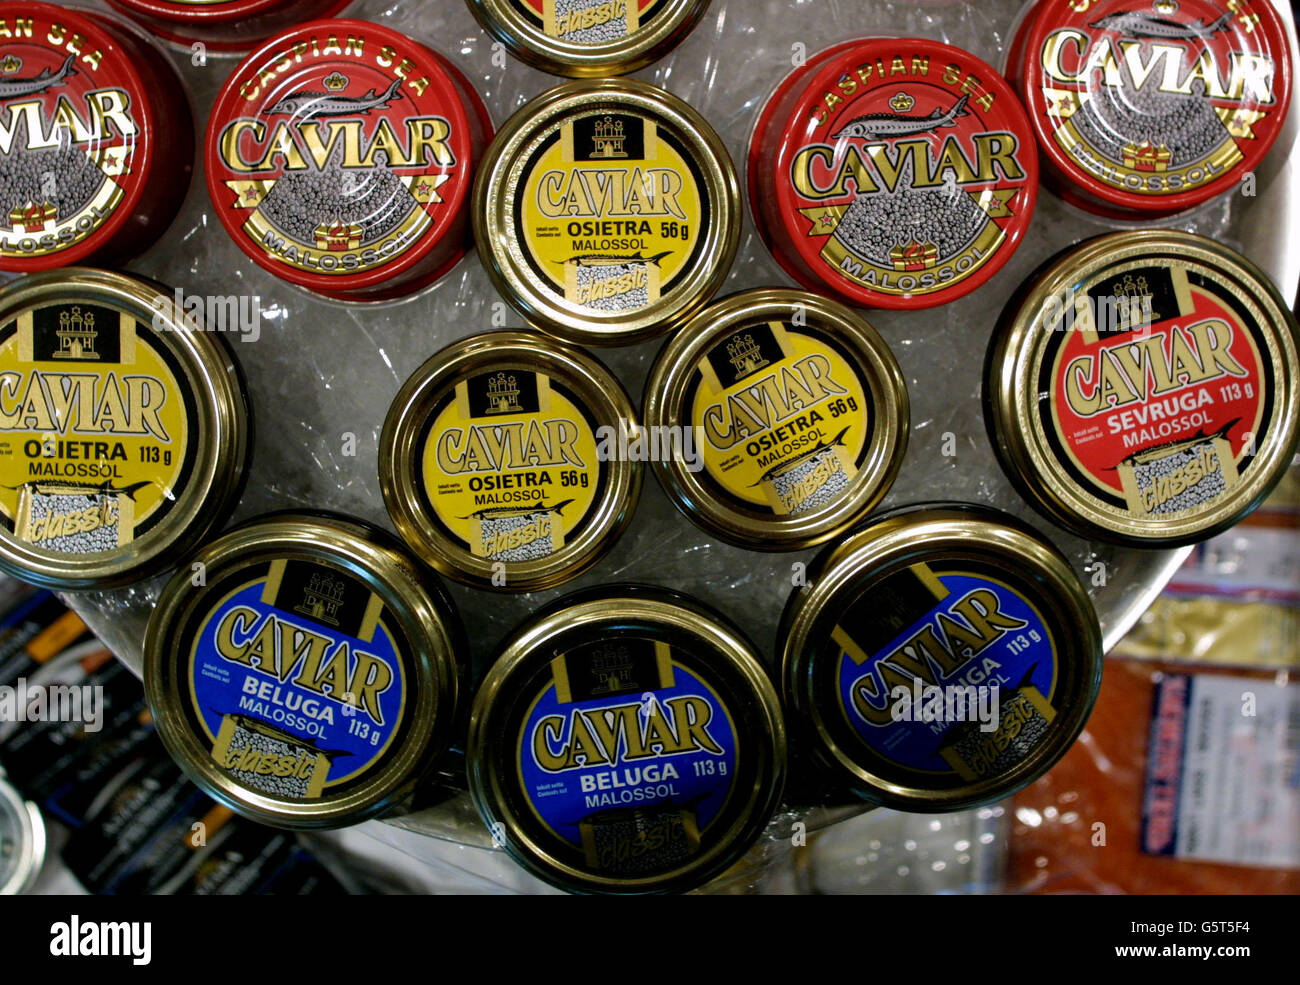 Caviar on sale on board the 'World', the 182 million ship on which the mega-rich will live permanently in luxury apartments, as it lays at anchor in Greenwich, London. The 648ft-long vessel weighing 43,000-tonnes, has 110 apartments on board. *...most of which have already been sold. The apartments range in price from 1.4 million to more than 5 million, and in size from 1,106 to 3,242 sq ft. The vessel also has 88 suites for rent, as well as all the shops, restaurants, and recreational facilities that might be expected in a small, wealthy town. Stock Photo